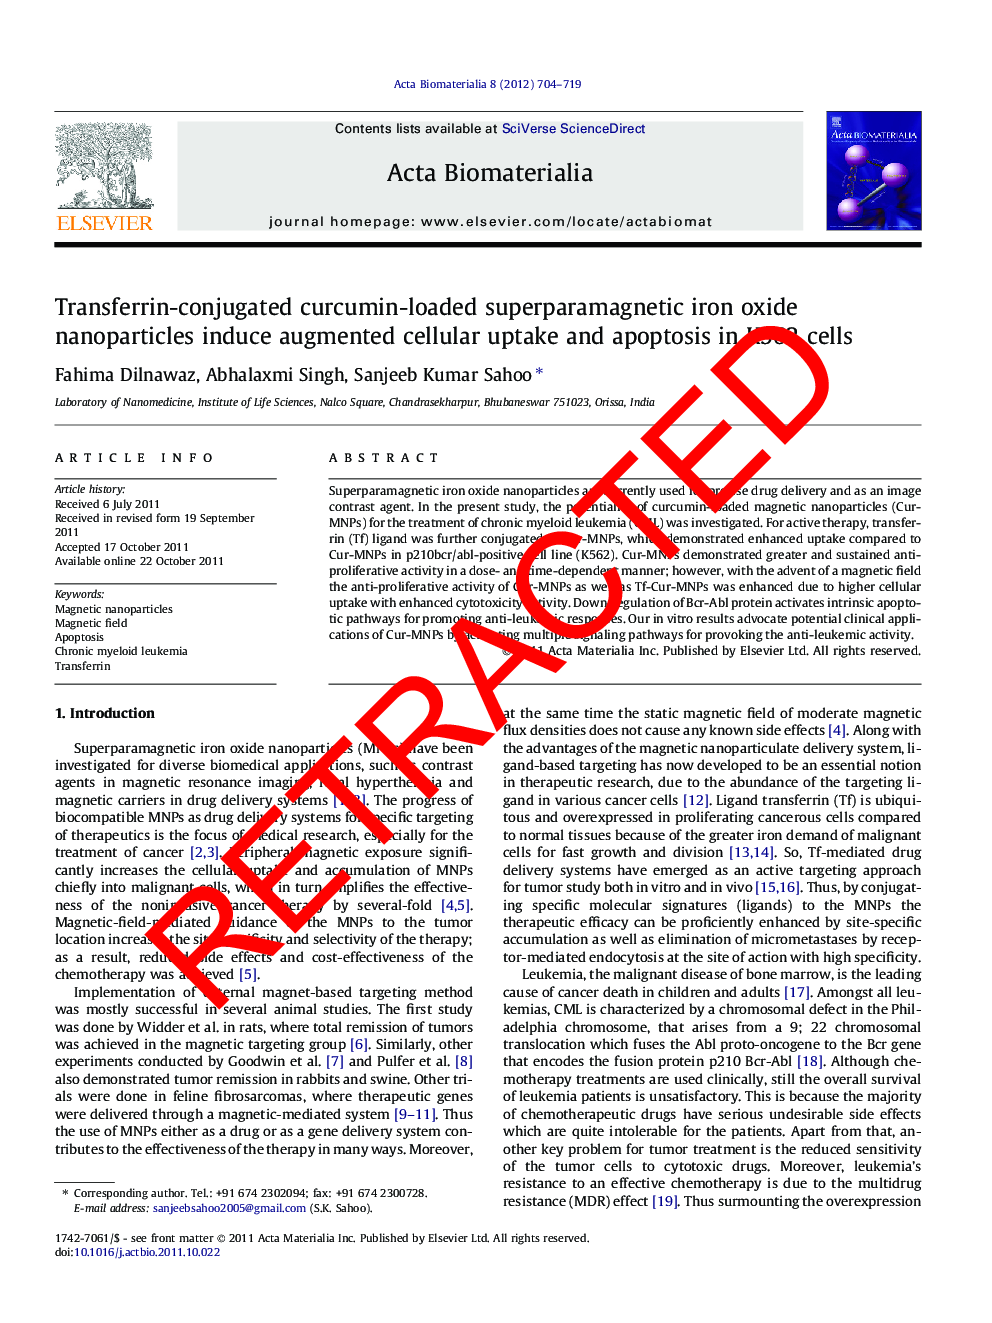 Retraction notice to ‘‘Transferrin-conjugated curcumin-loaded superparamagnetic iron oxide nanoparticles induce augmented cellular uptake and apoptosis in K562 cells’’[Acta Biomaterialia 8 (2011) 704–719]